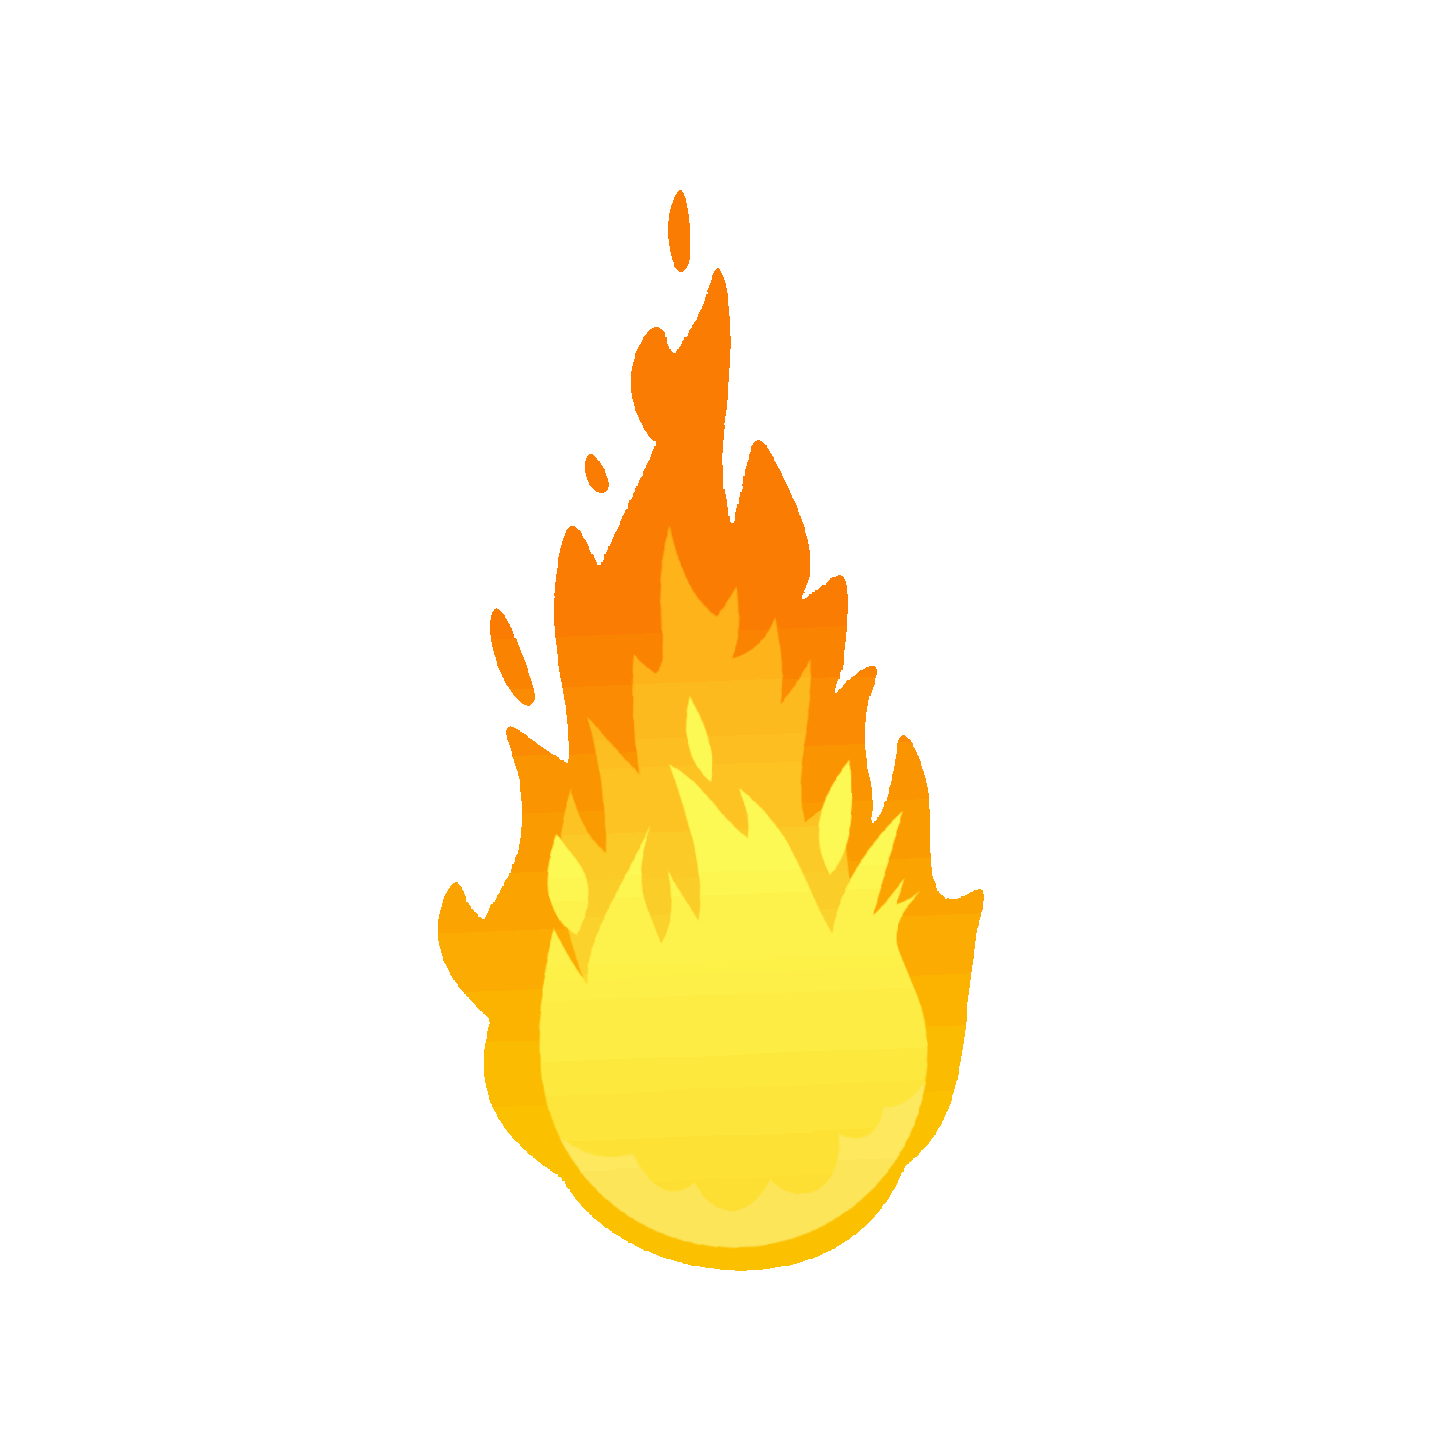 Fire clipart animated gif, Fire animated gif Transparent FREE for